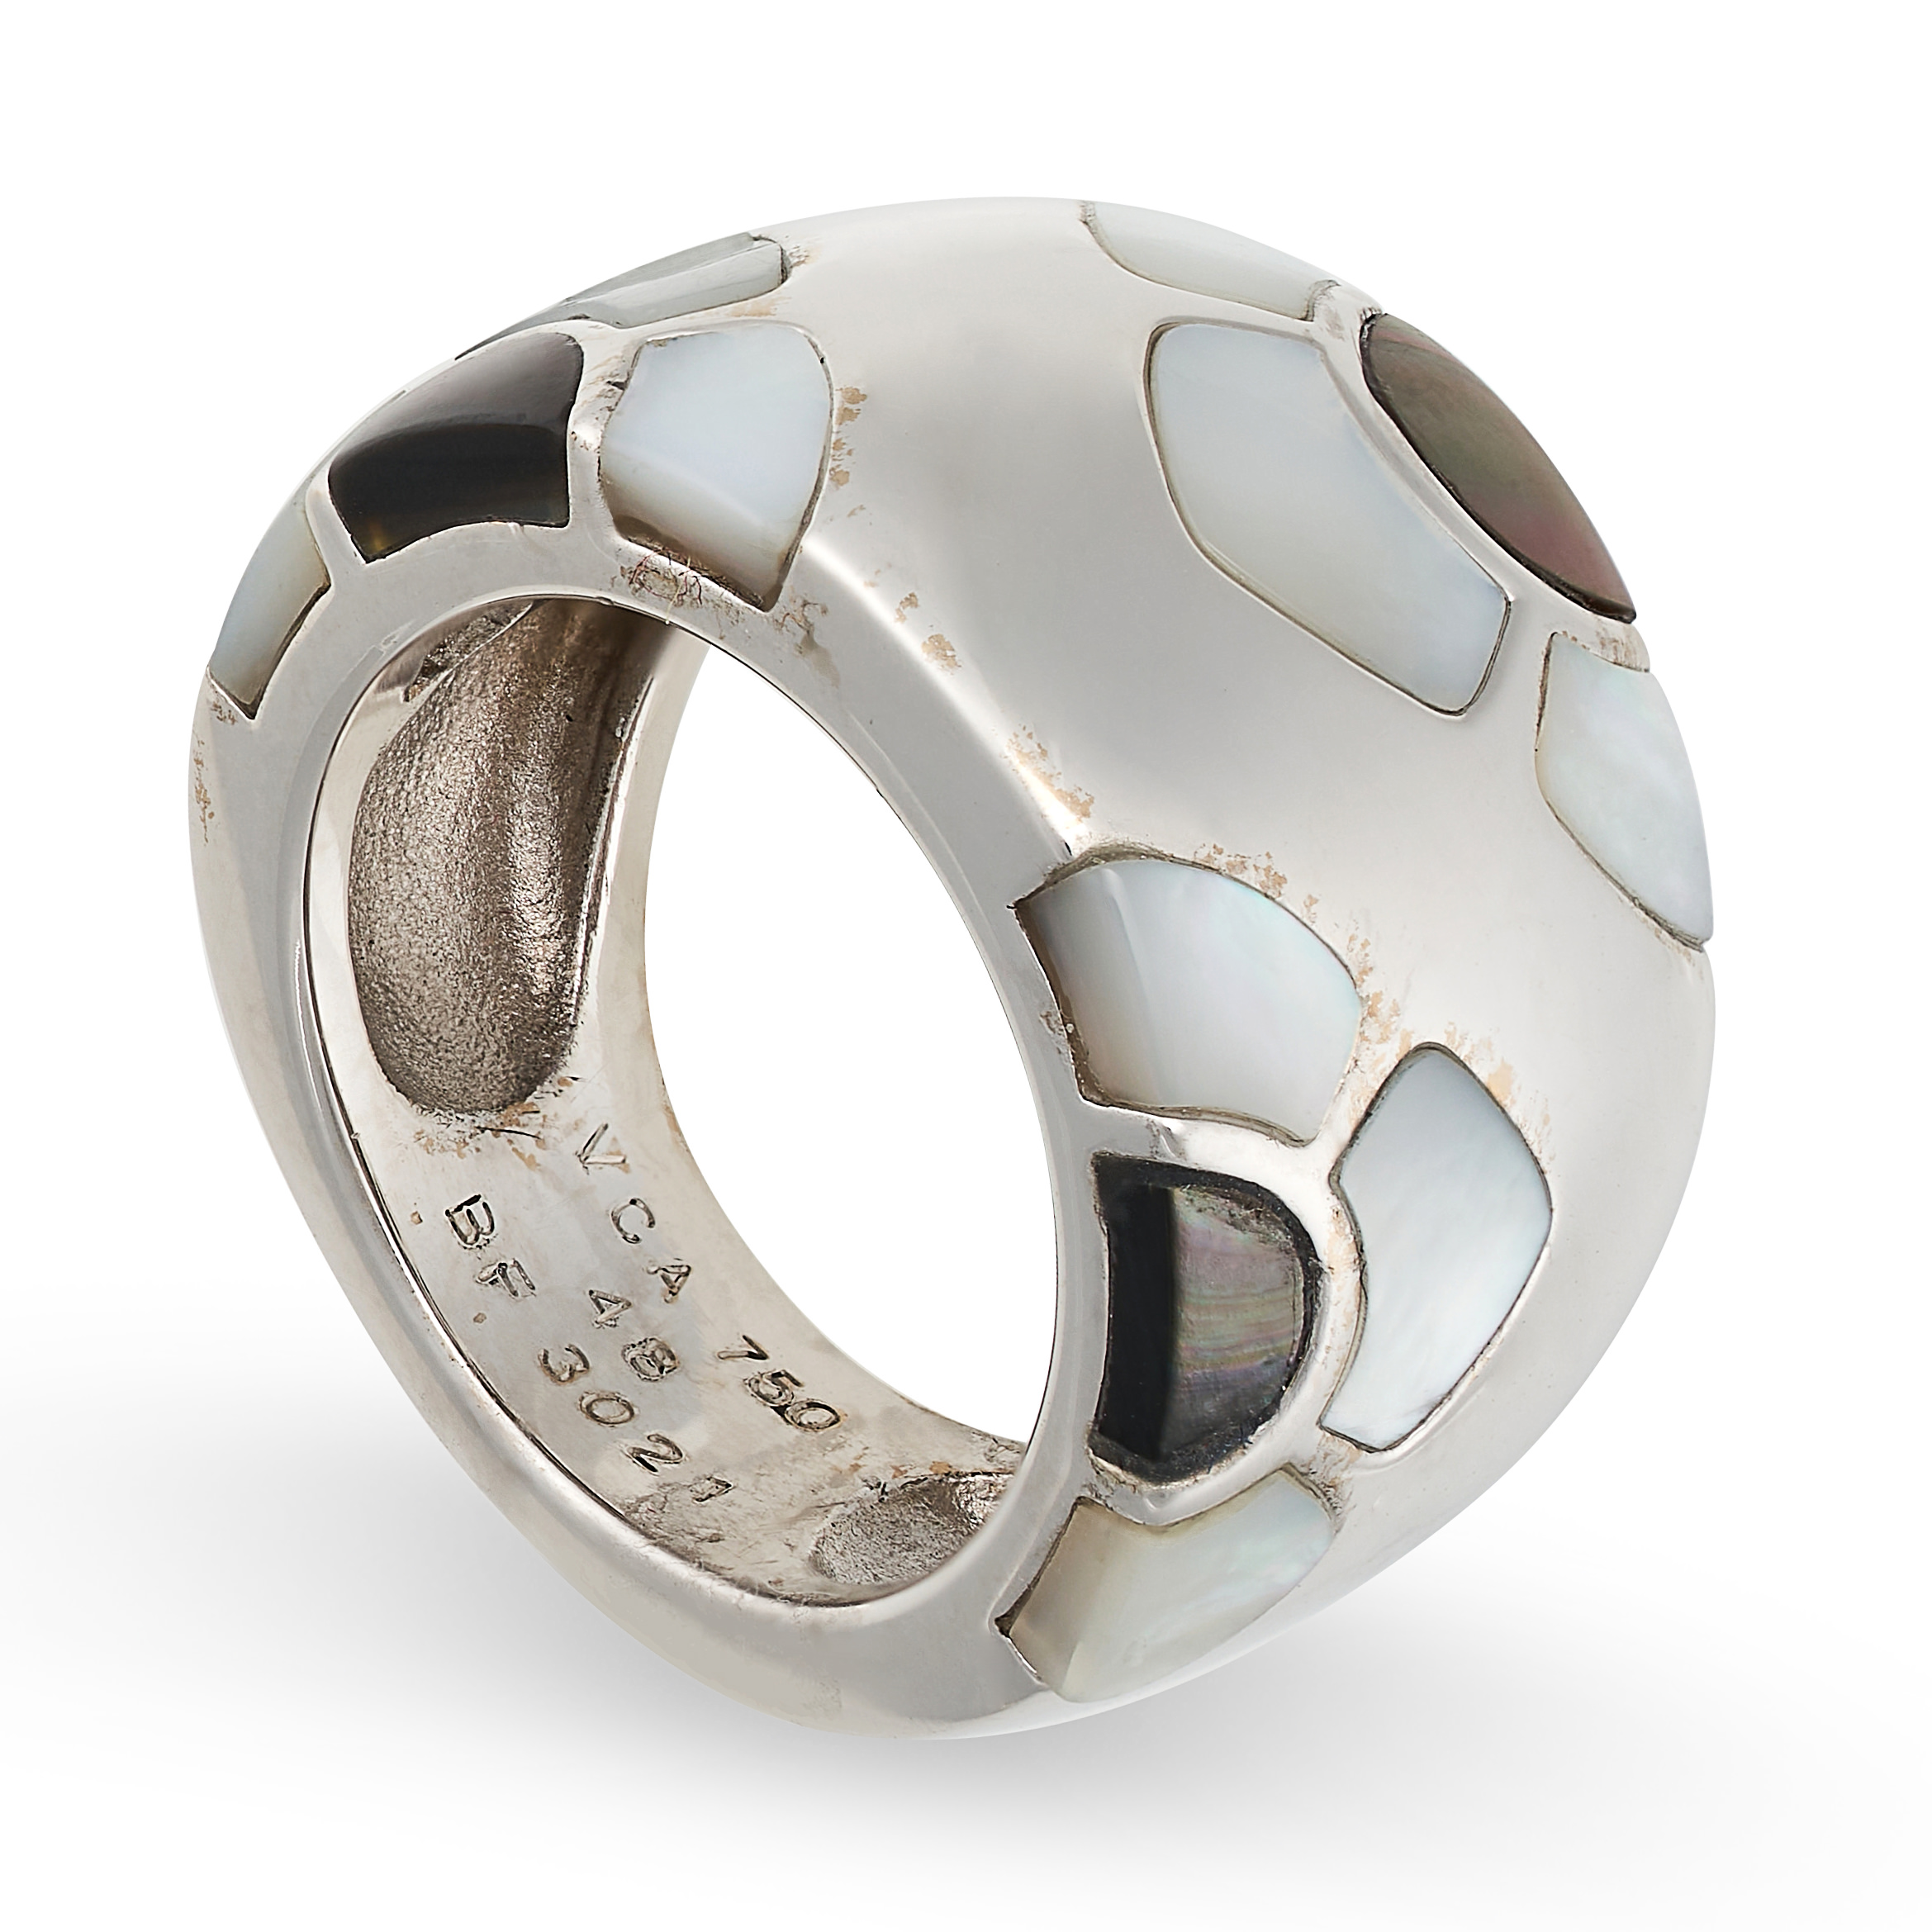 VAN CLEEF & APRELS, A MOTHER OF PEARL MARQUETERIE RING in 18ct white gold, the bombe face set with - Image 2 of 2